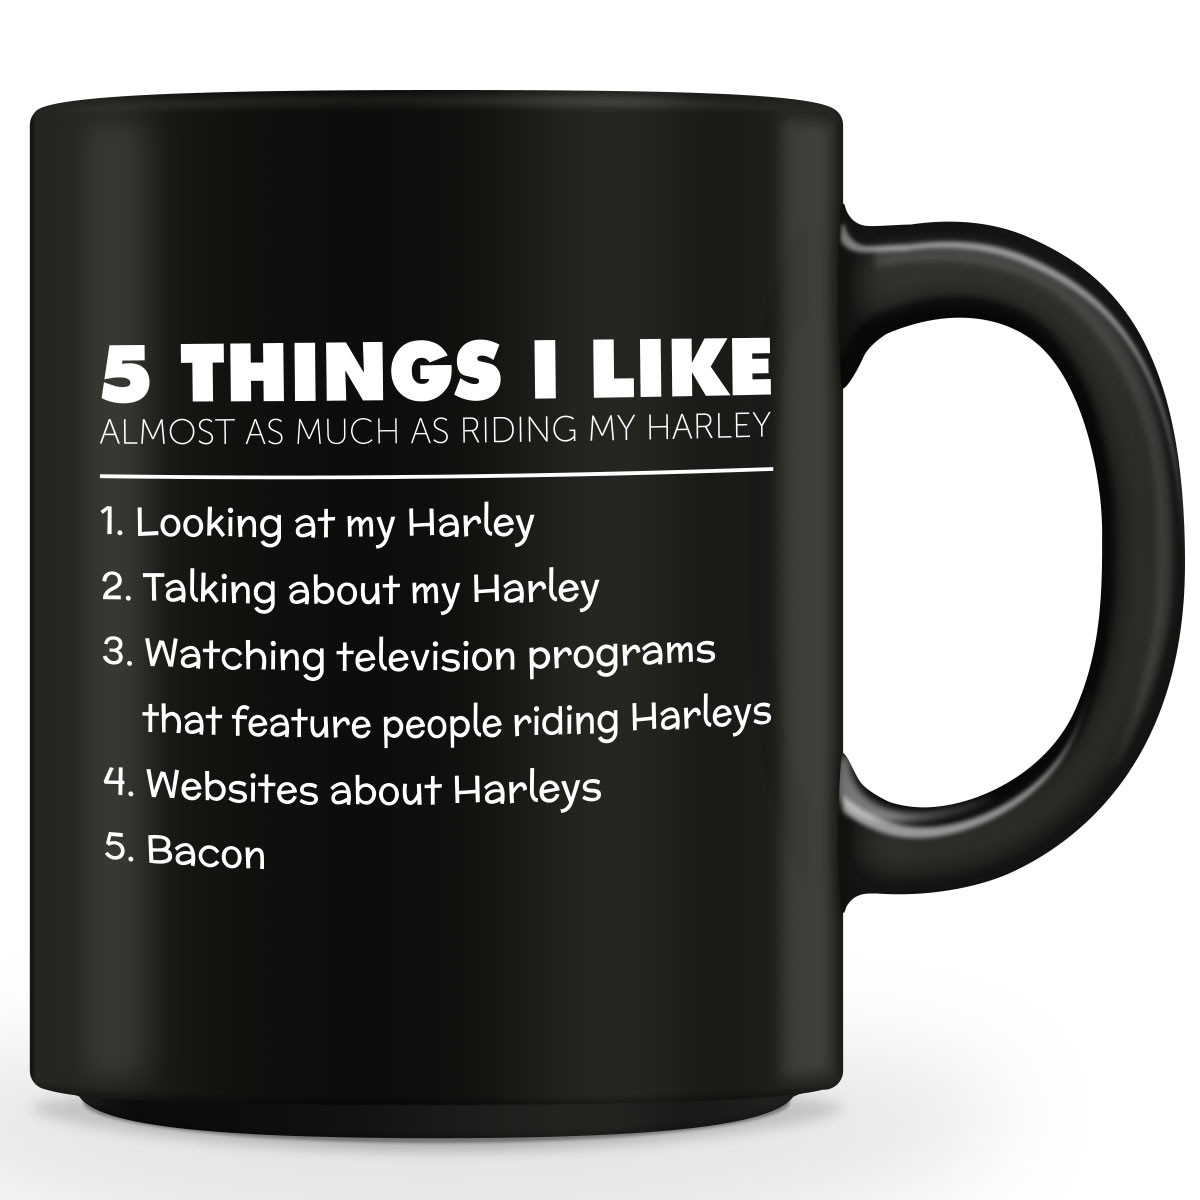 5 Things I Like Almost As Much As Riding My Harley Mug